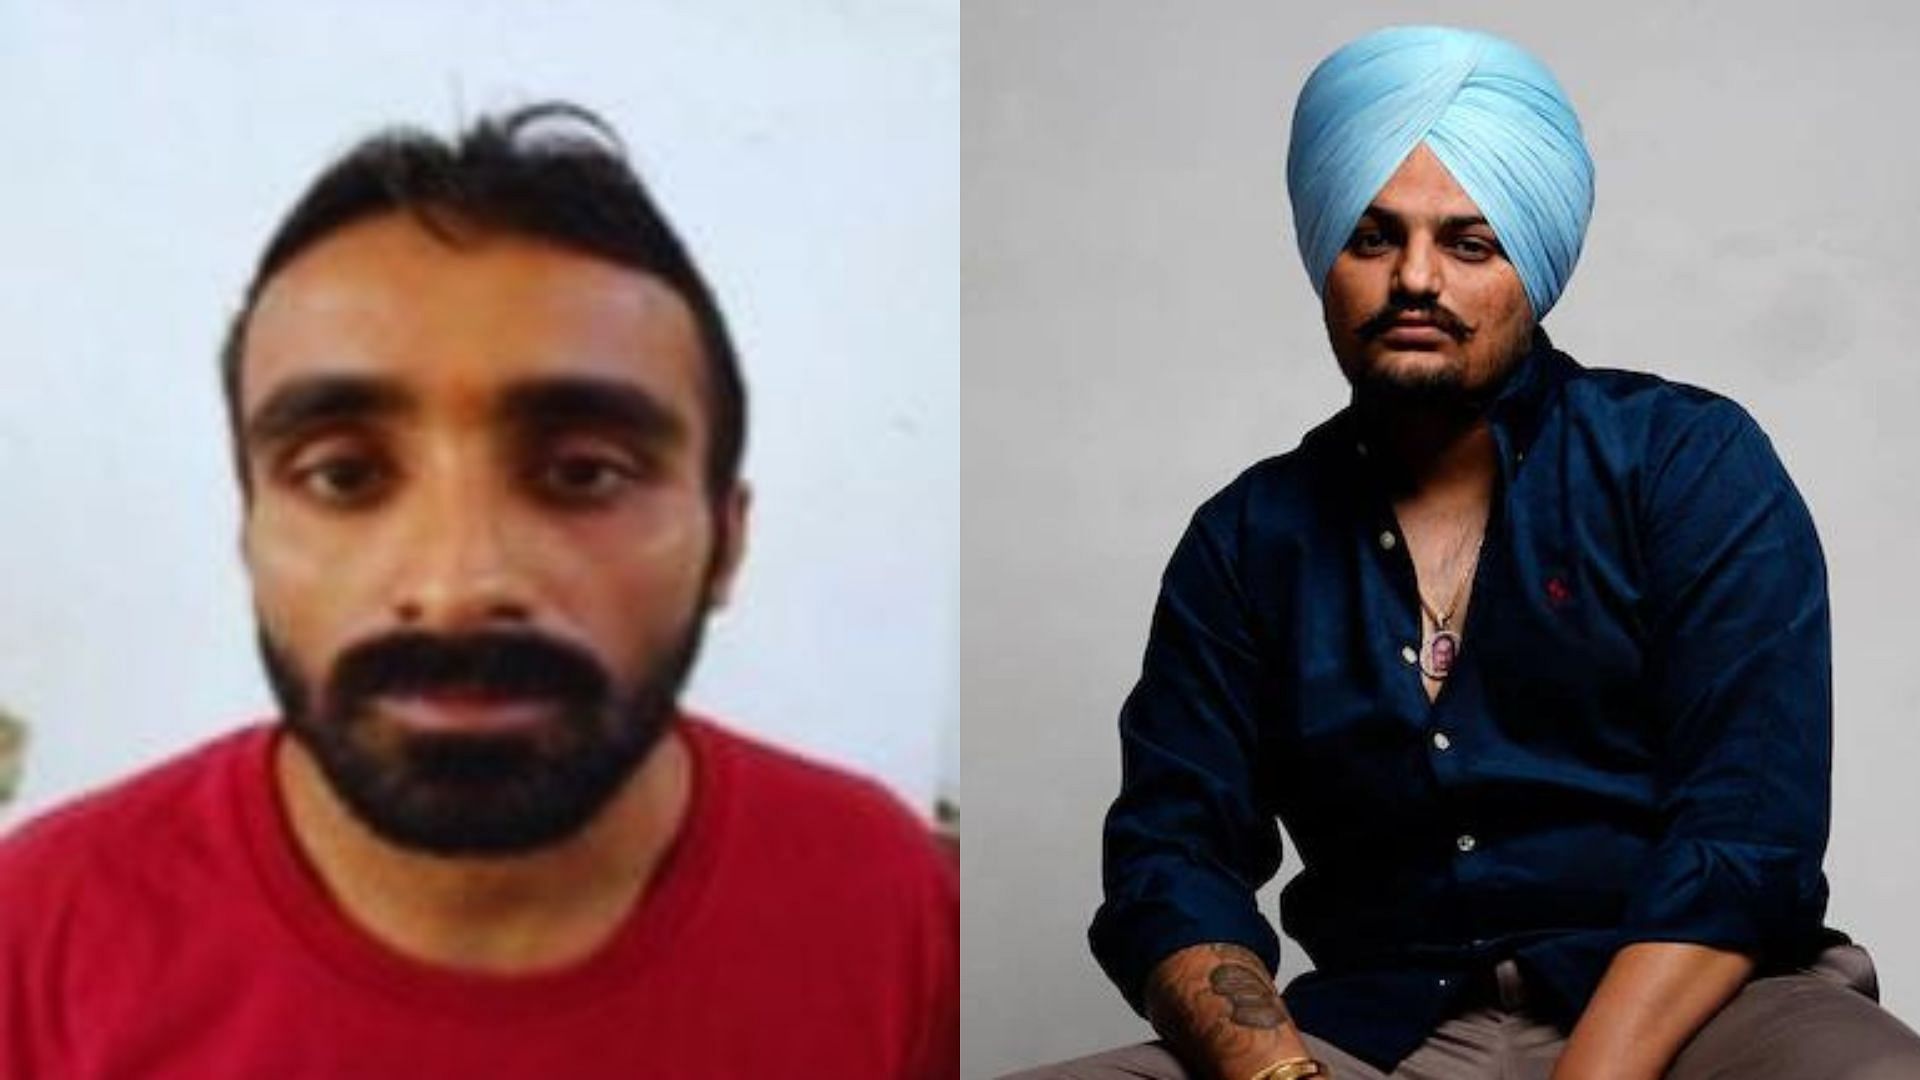 <div class="paragraphs"><p>In a major breakthrough in the case pertaining to the murder of Sidhu Moose Wala, an individual identified as Sachin Thapan, who was in touch with key accused <a href="https://www.thequint.com/topic/goldy-brar">Goldy Brar</a>, has been detained in Azerbaijan with the support of the Government of India, Punjab DGP Gaurav Yadav said on Tuesday, 30 August.</p><p><br></p></div>